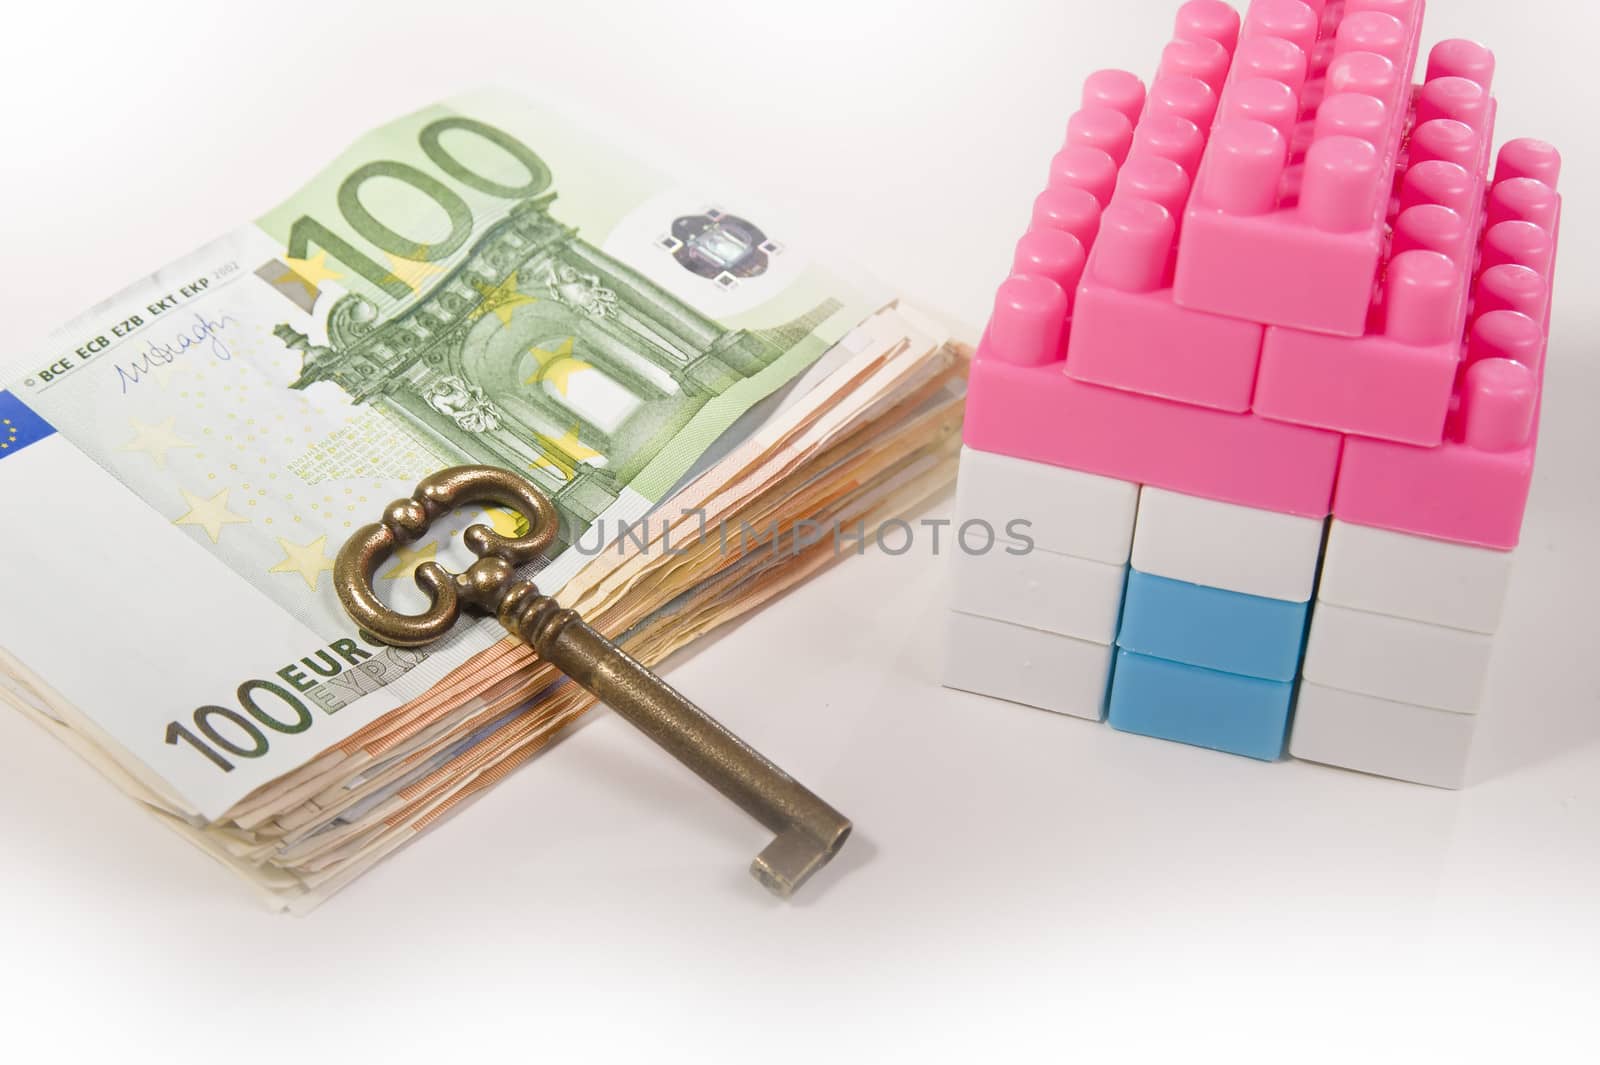  Miniature House with Key on a Banknotes Pile Isolated on White background